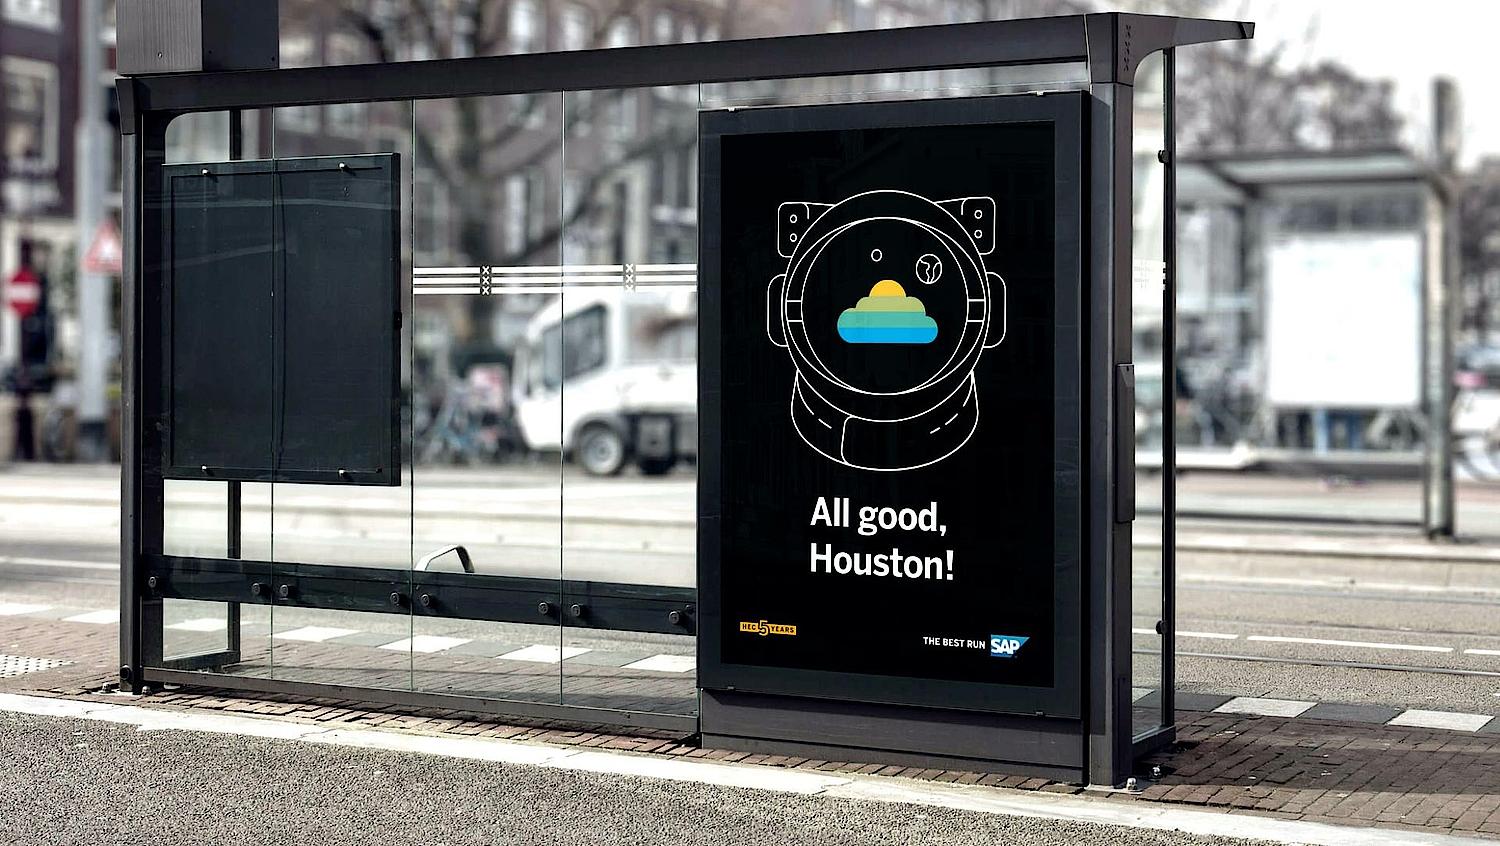 A poster in a bus station in SAP hybris design by agency SNK